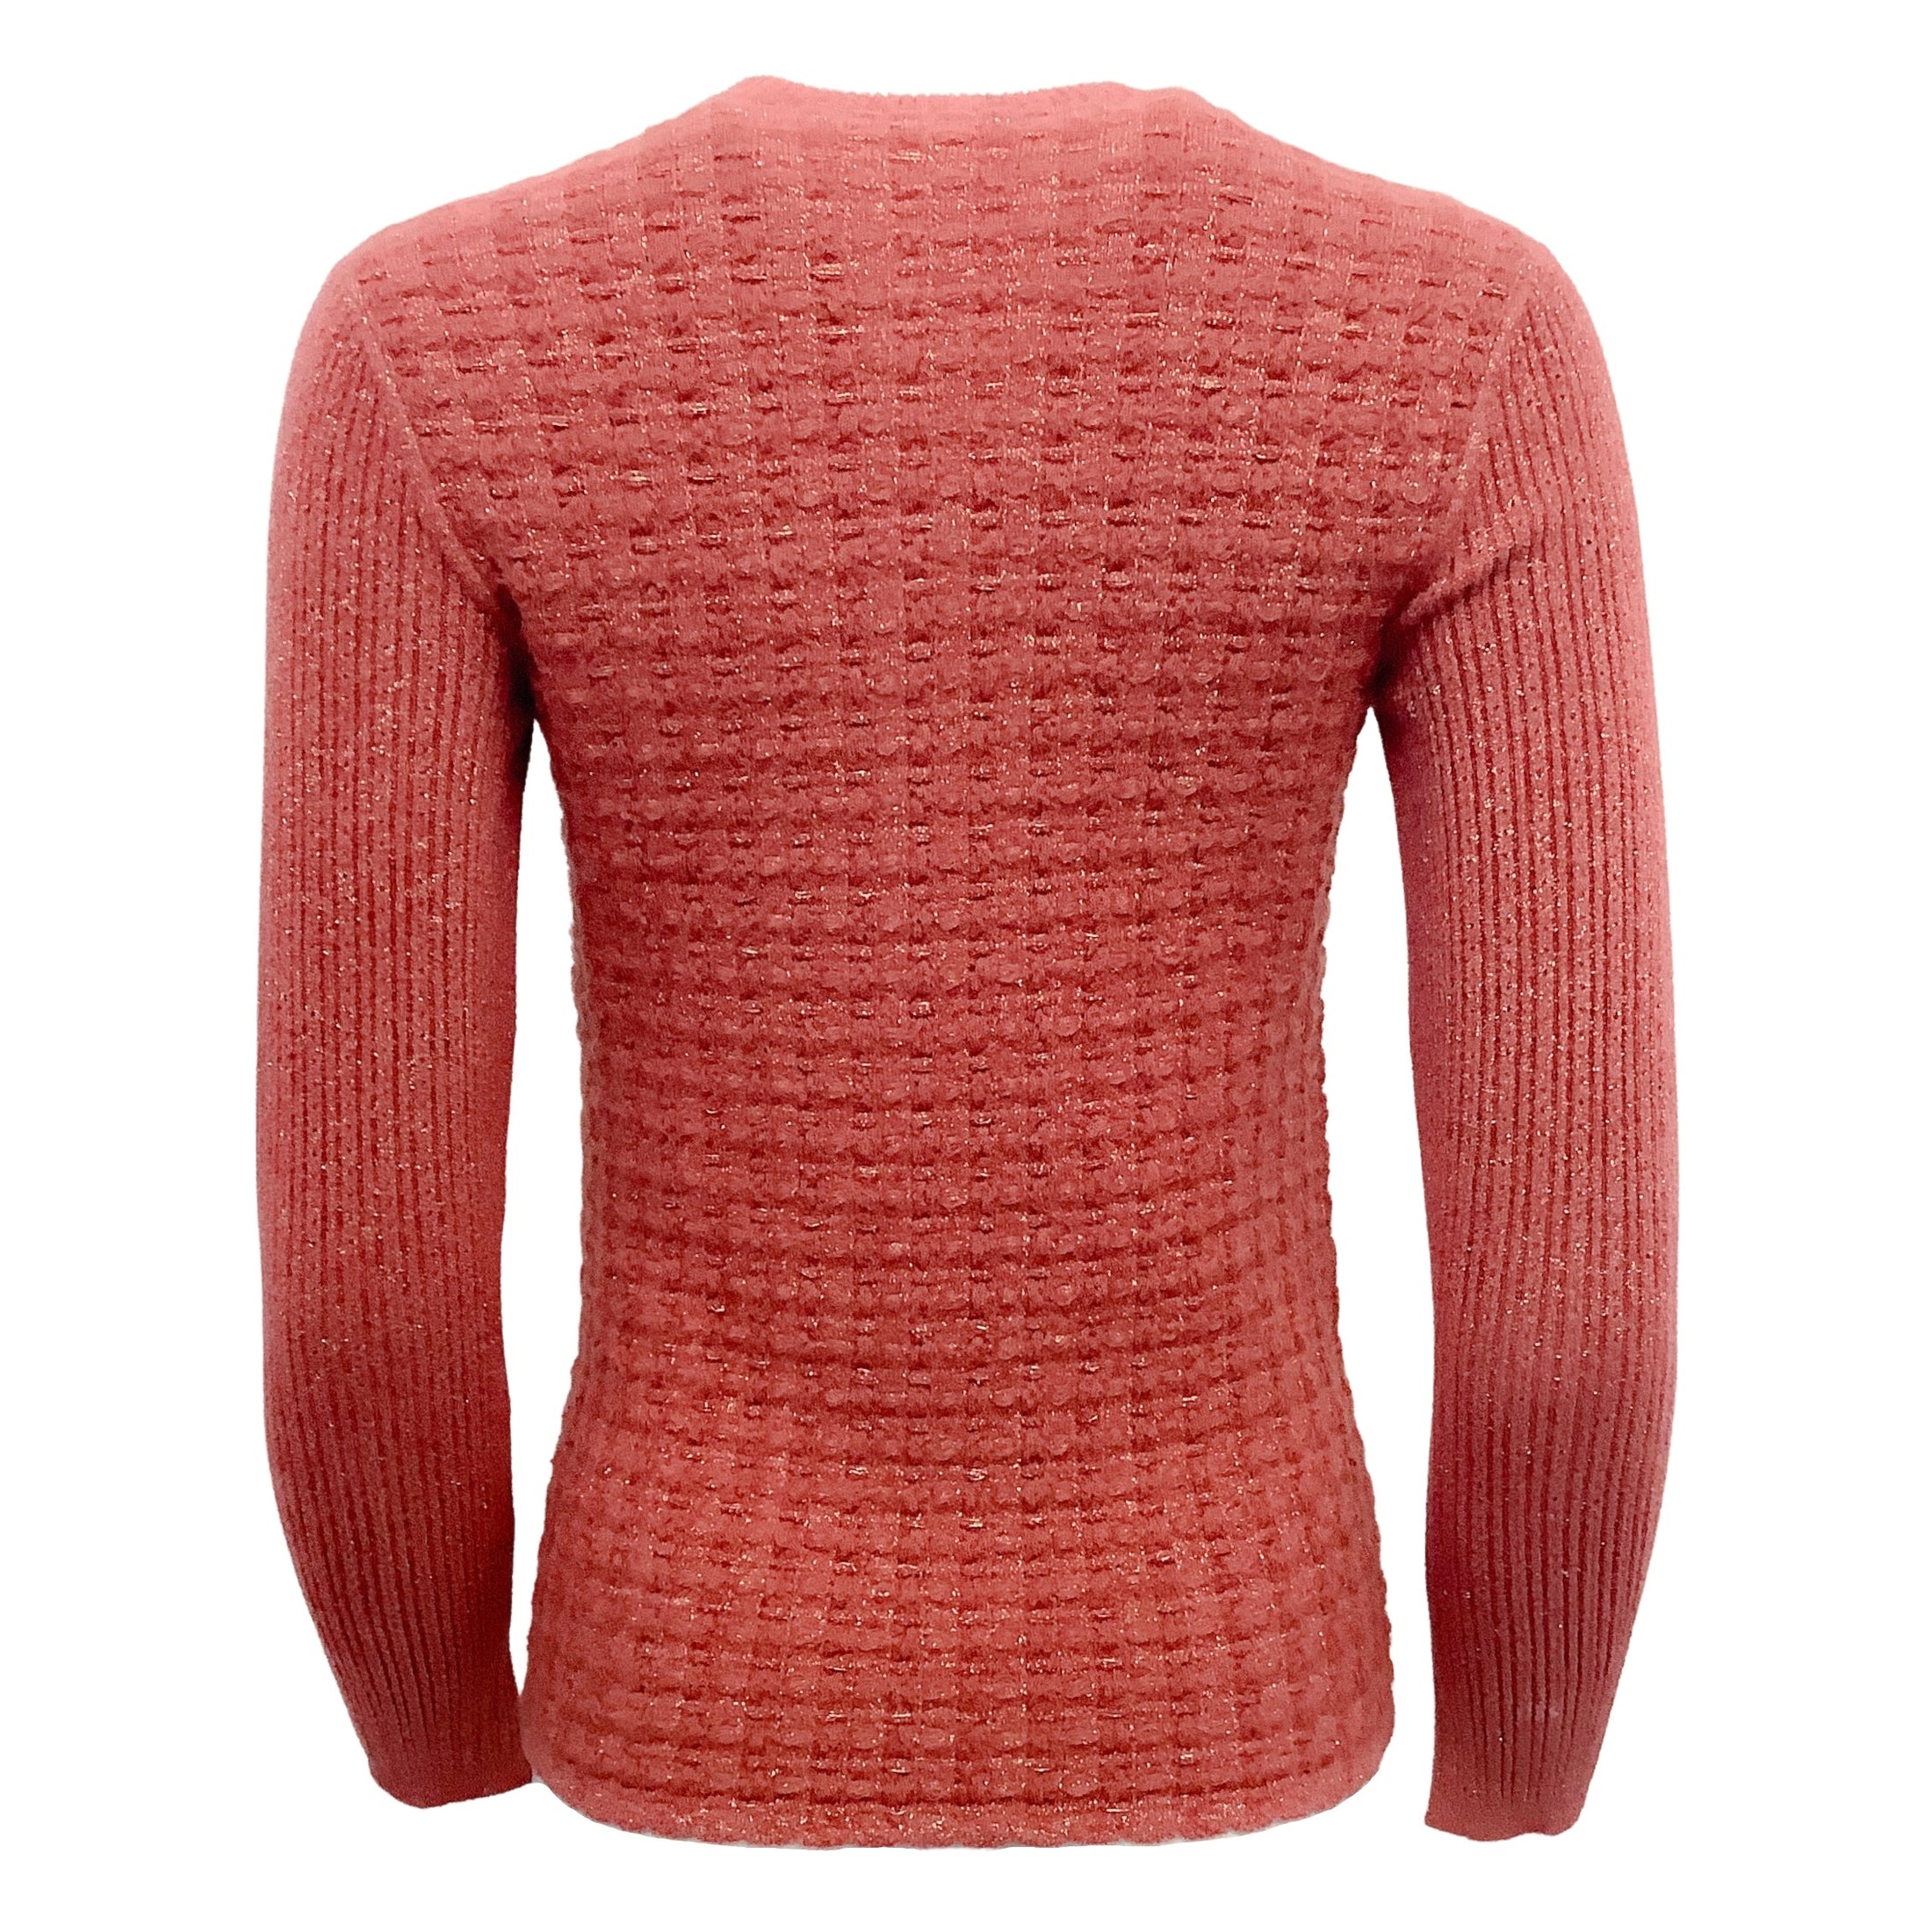 Chanel Pocket Front Cardigan Deep Pink Sweater